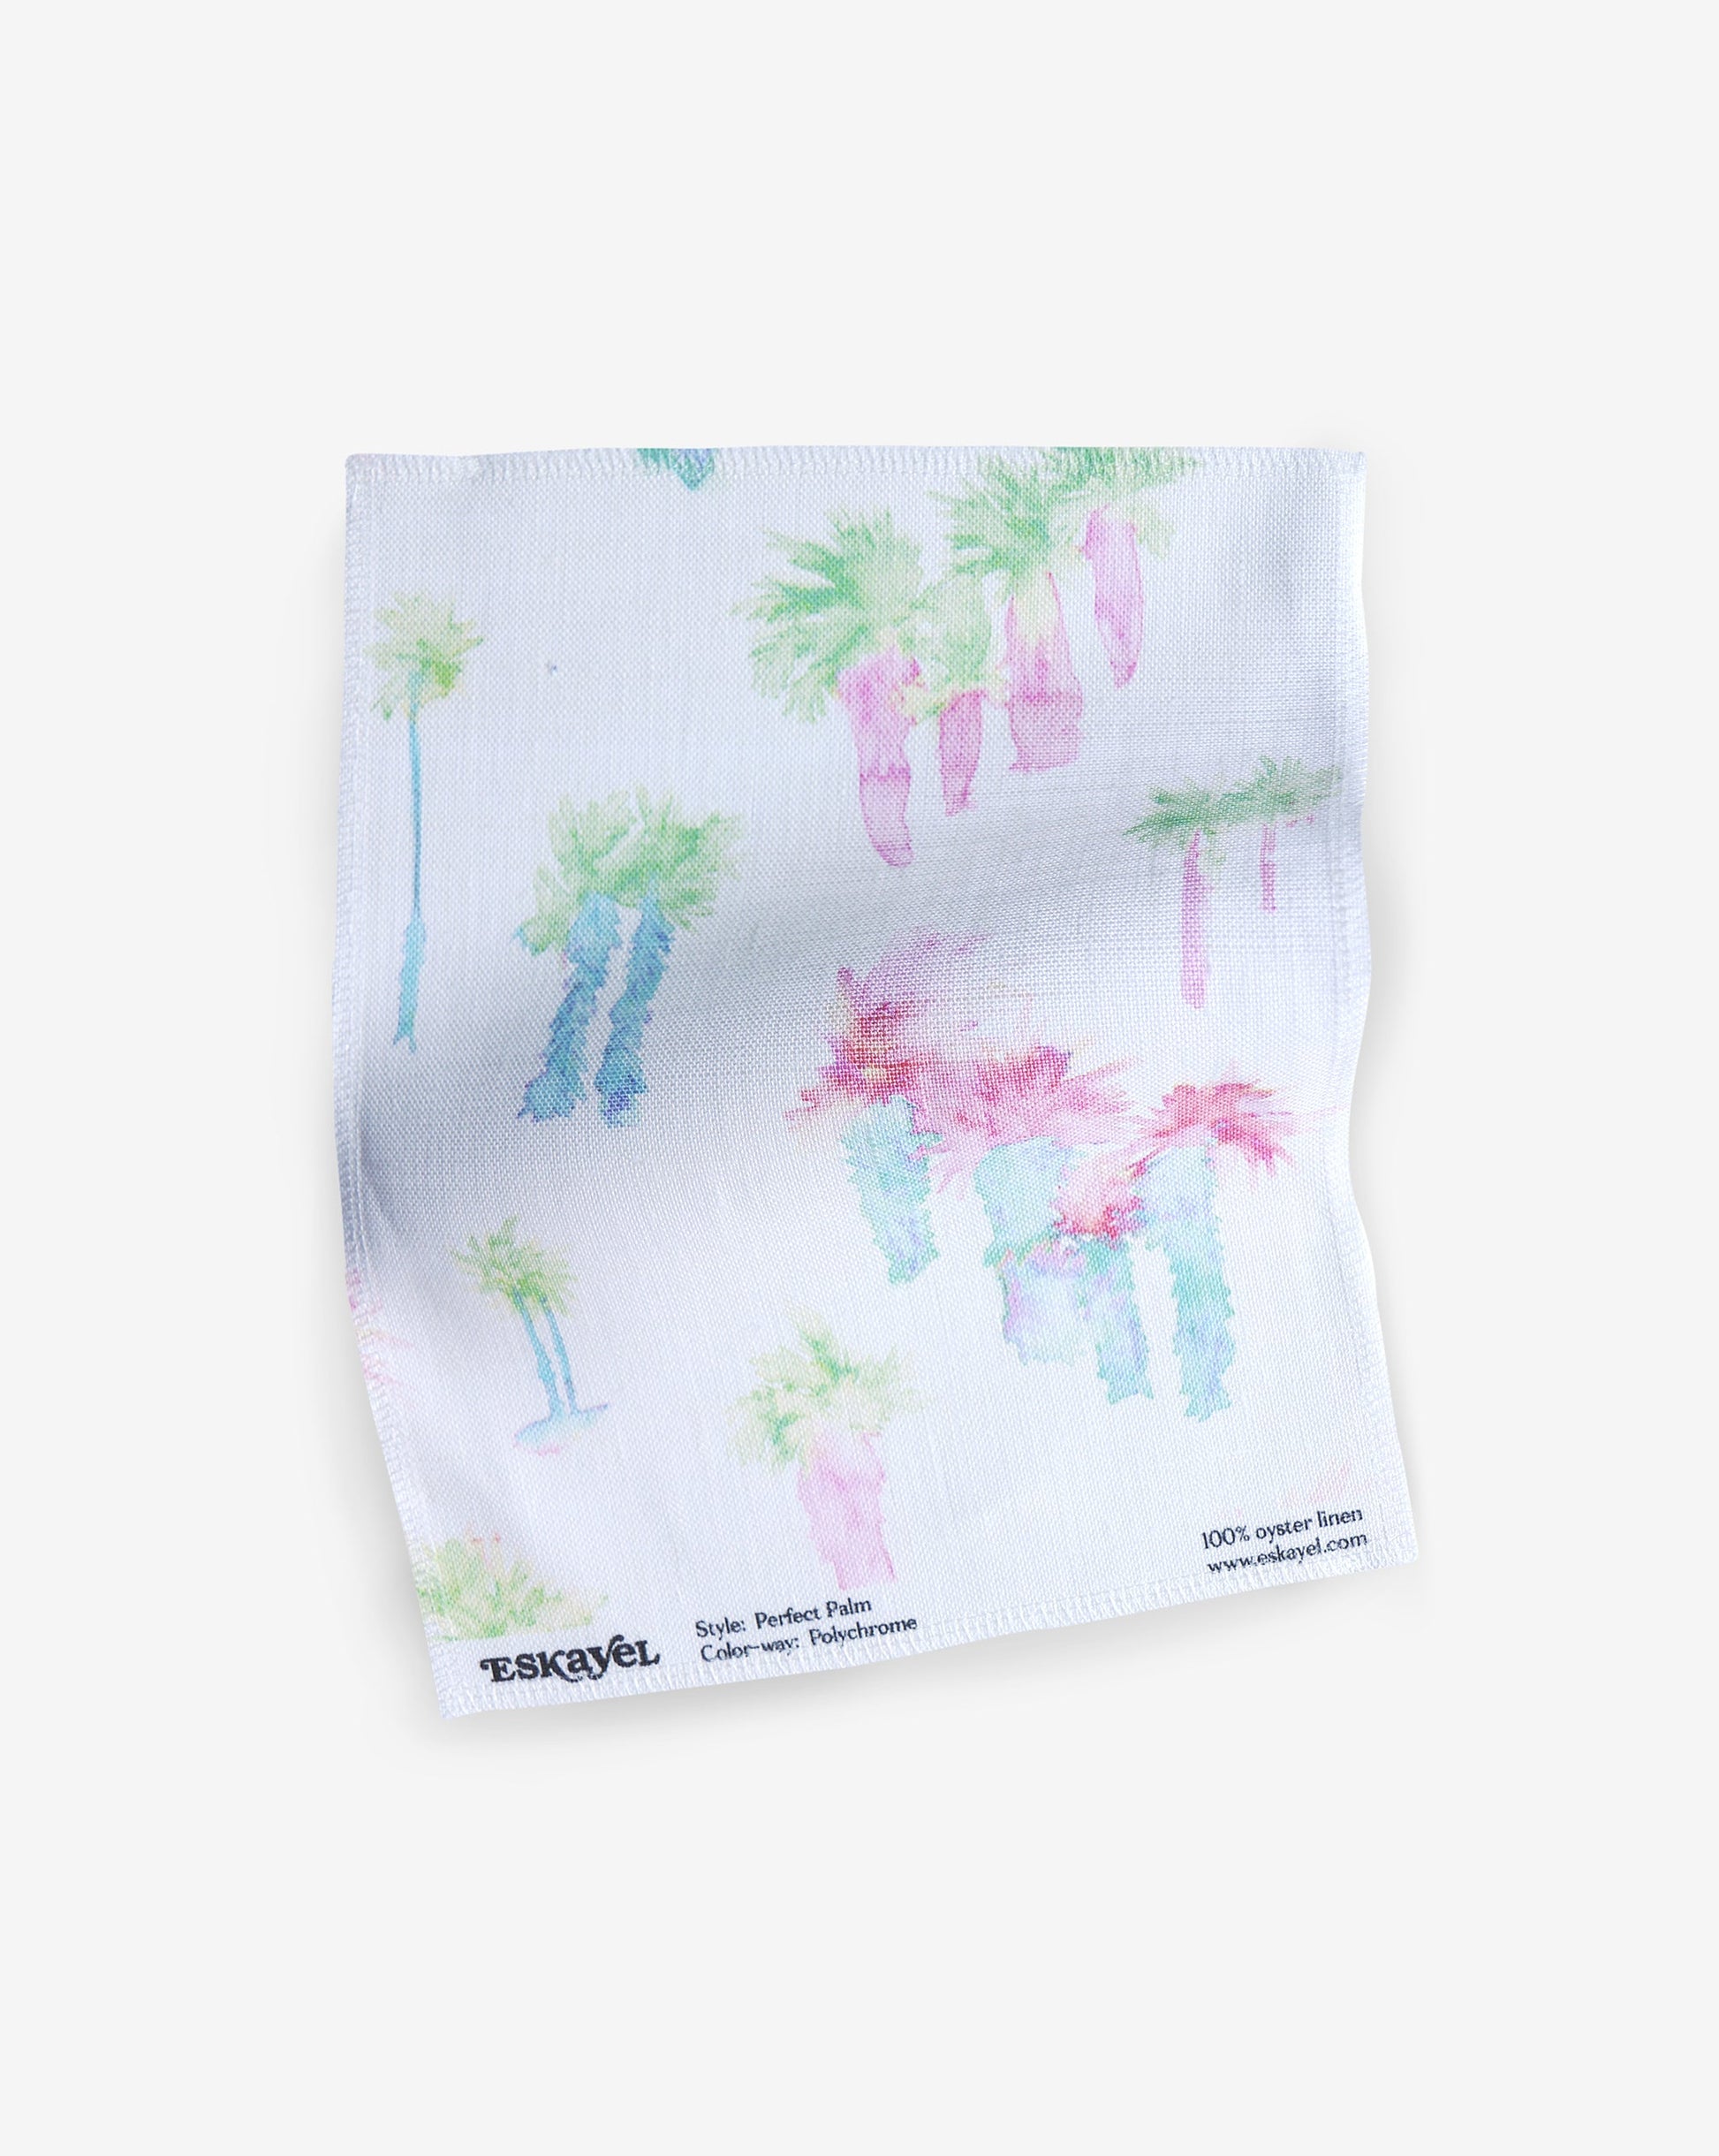 You can order a sample of the Perfect Palm Fabric Sample||Polychrome towel with palm trees on it.